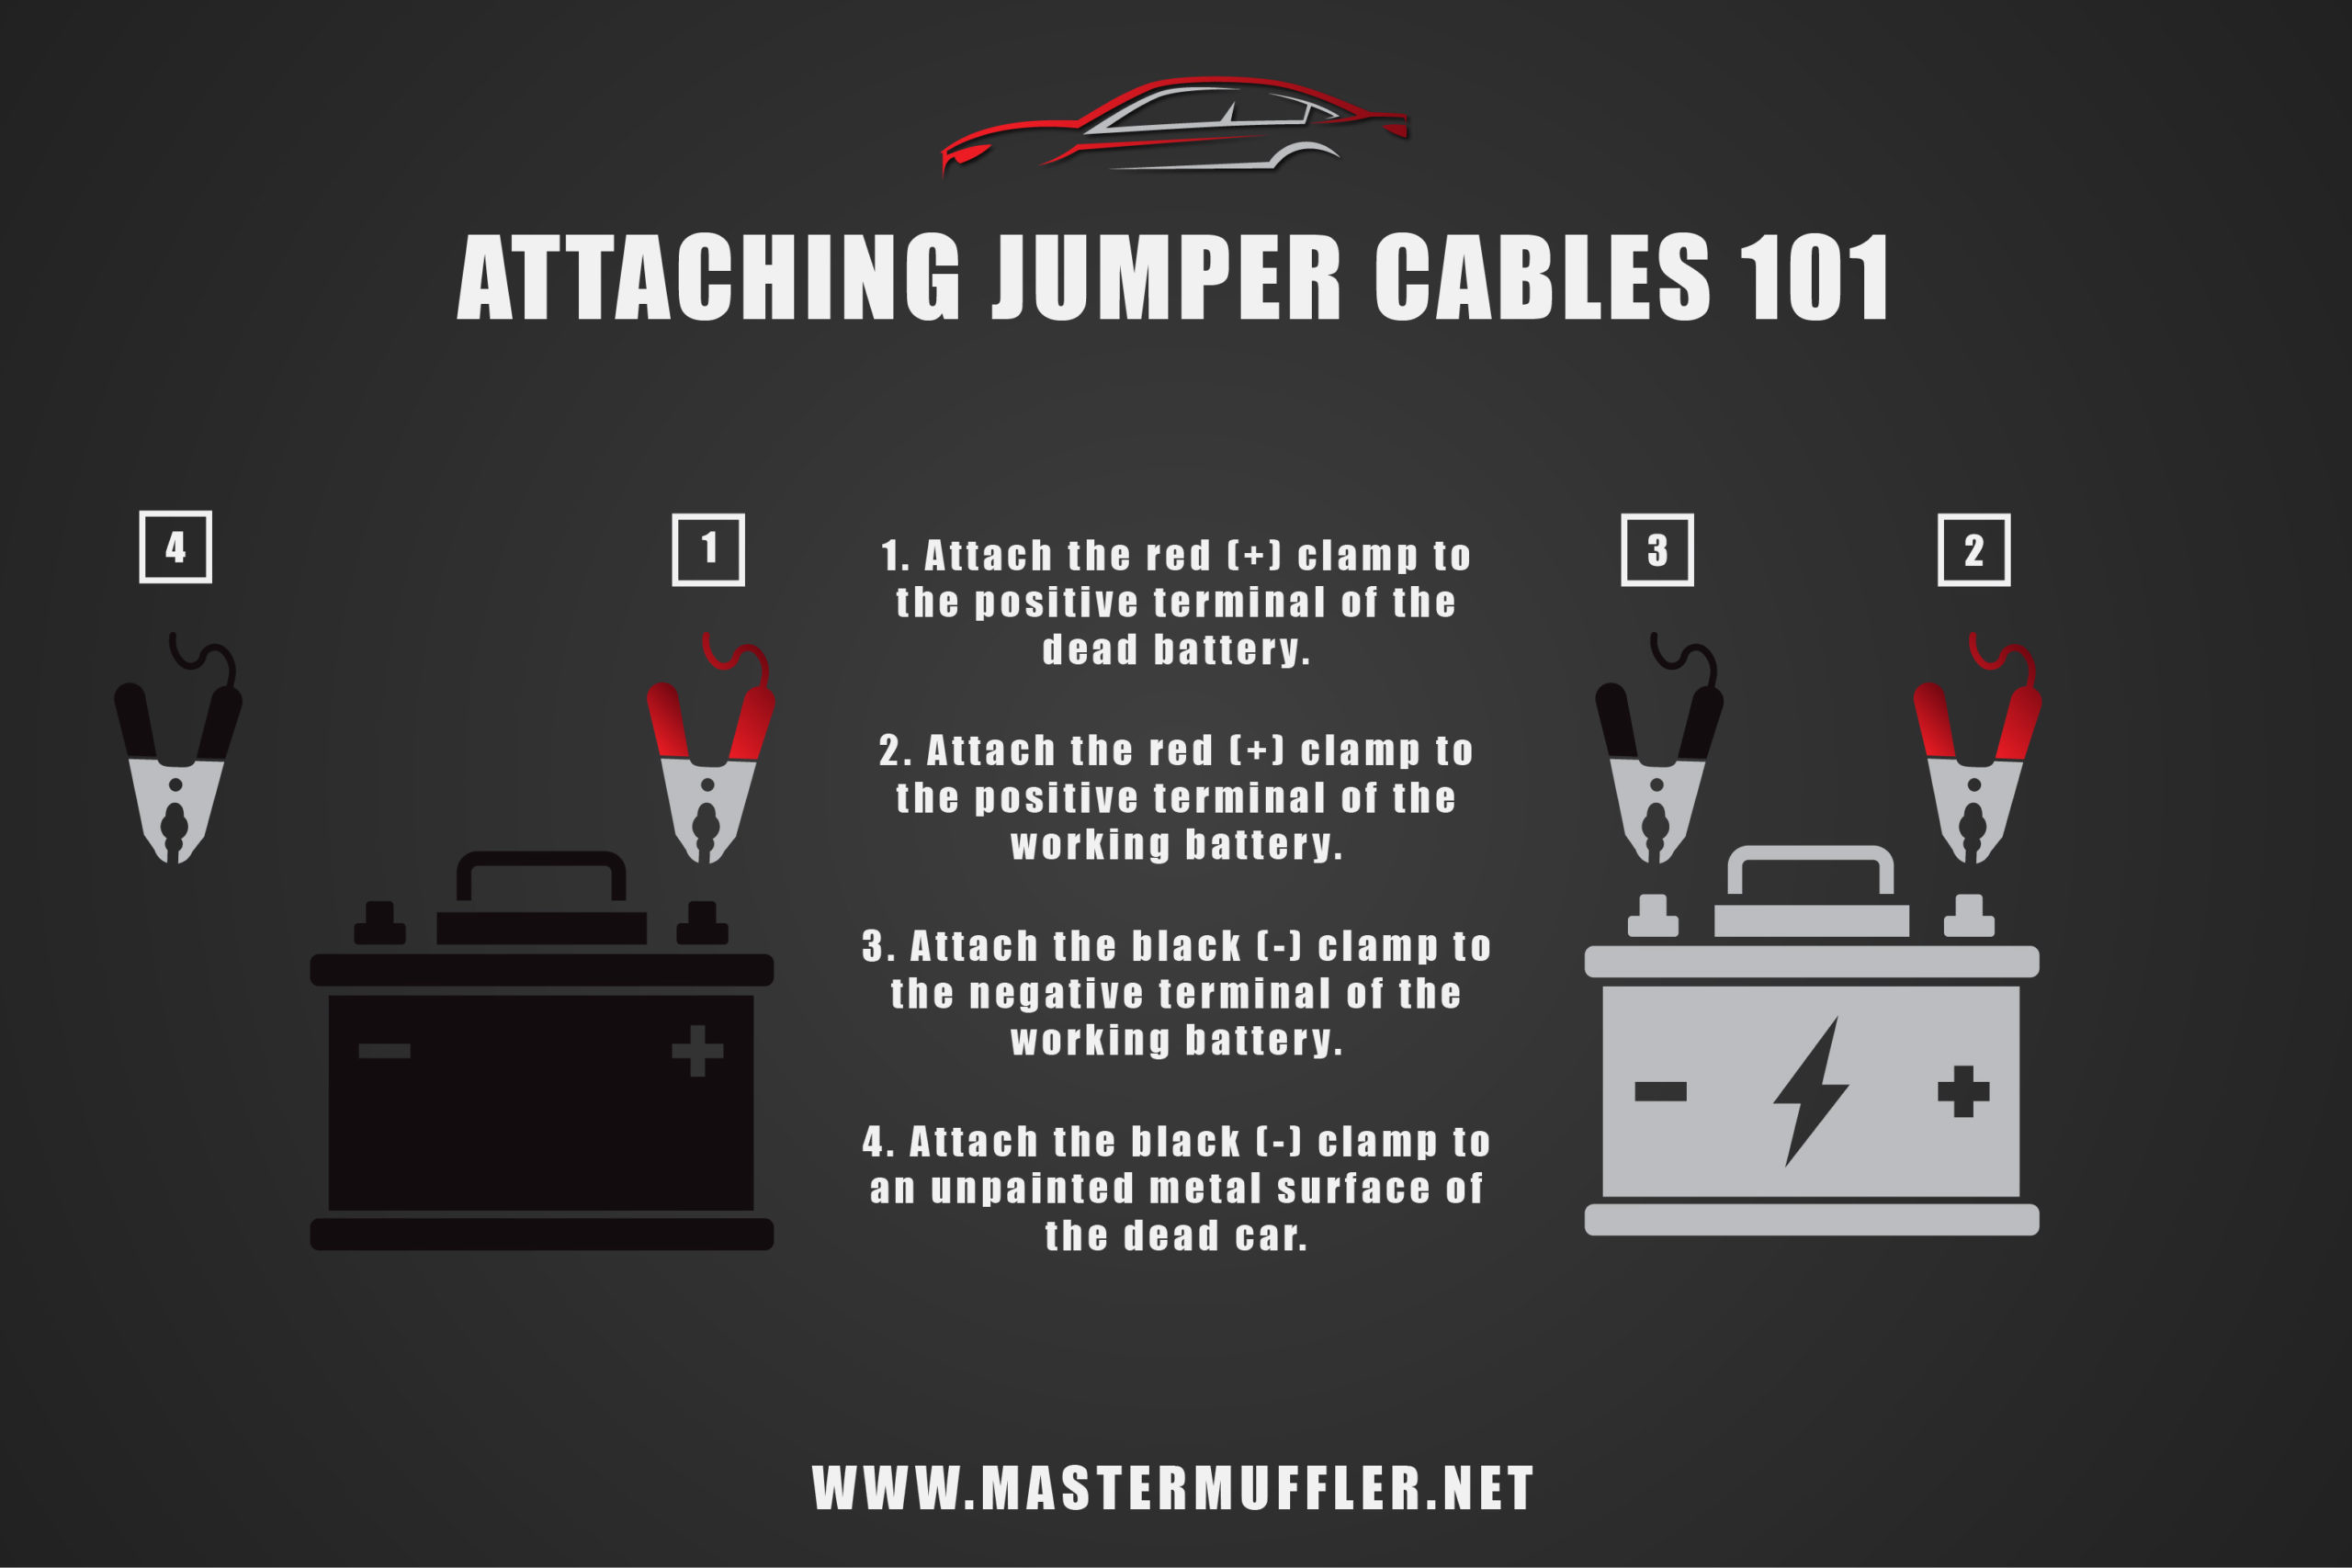 Auto repair infographic showing how to connect jumper cables